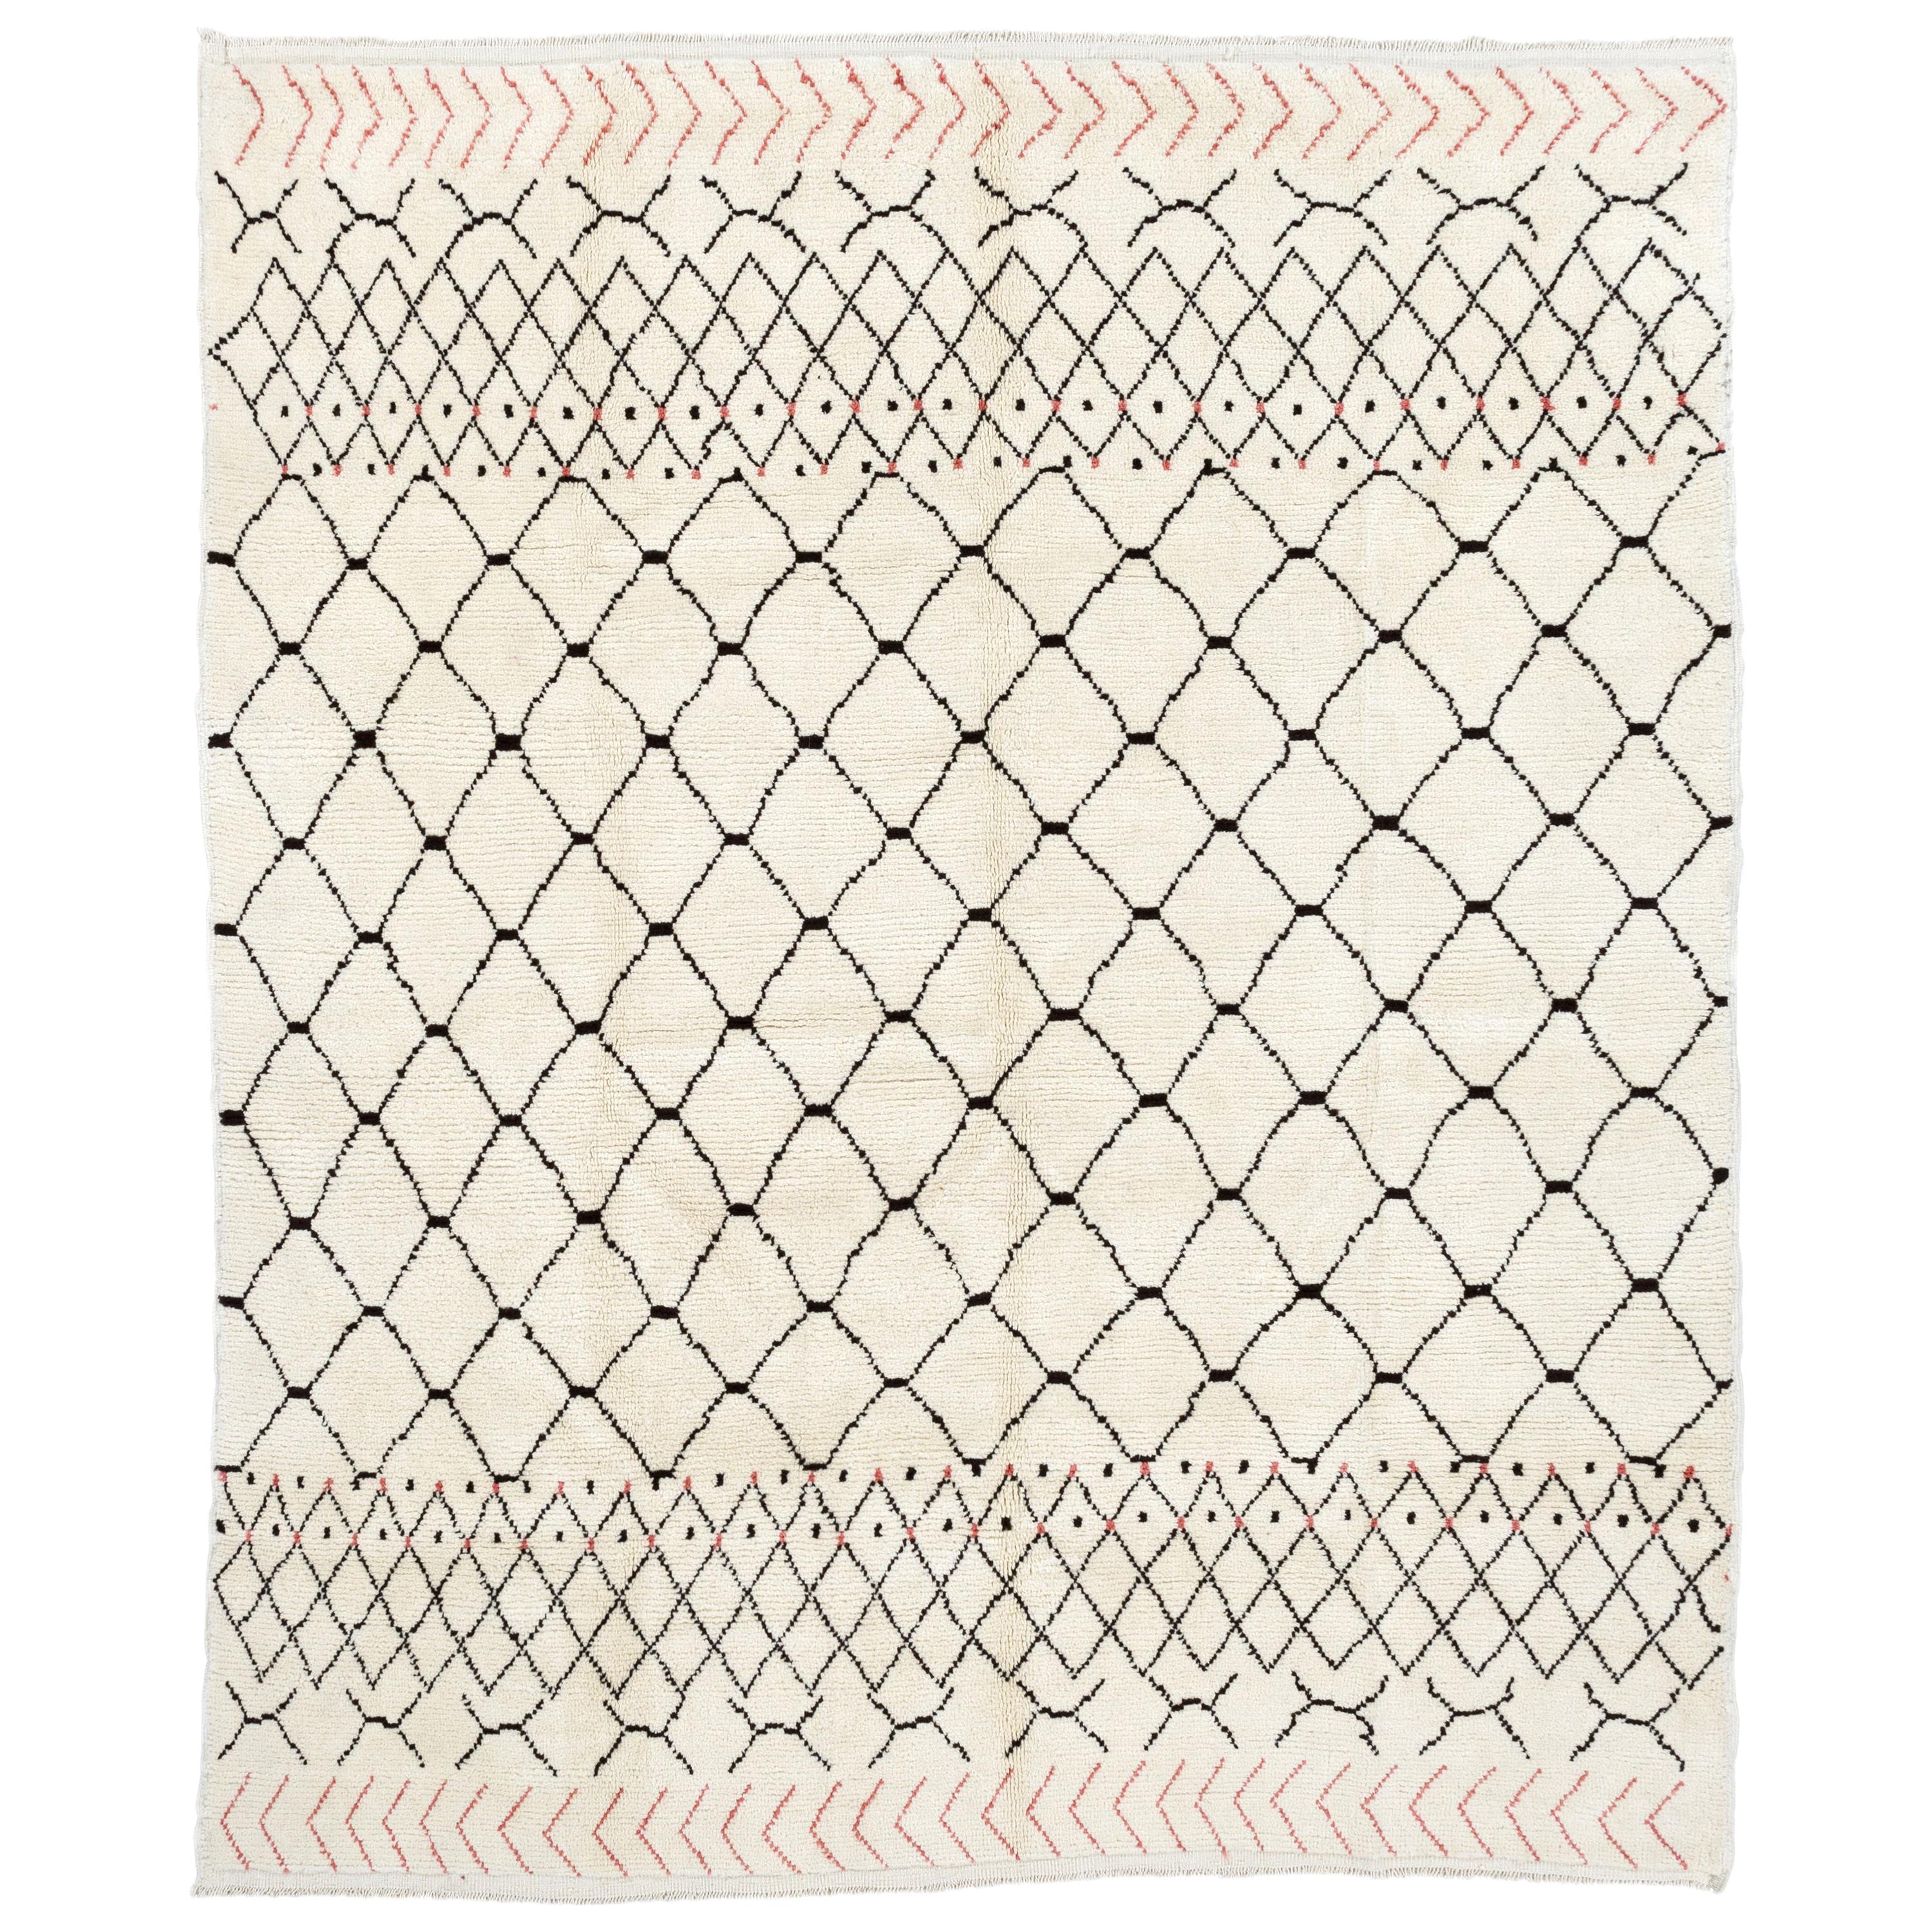 Contemporary Moroccan Beni Qurain Berber Rug. Custom Options Available For Sale